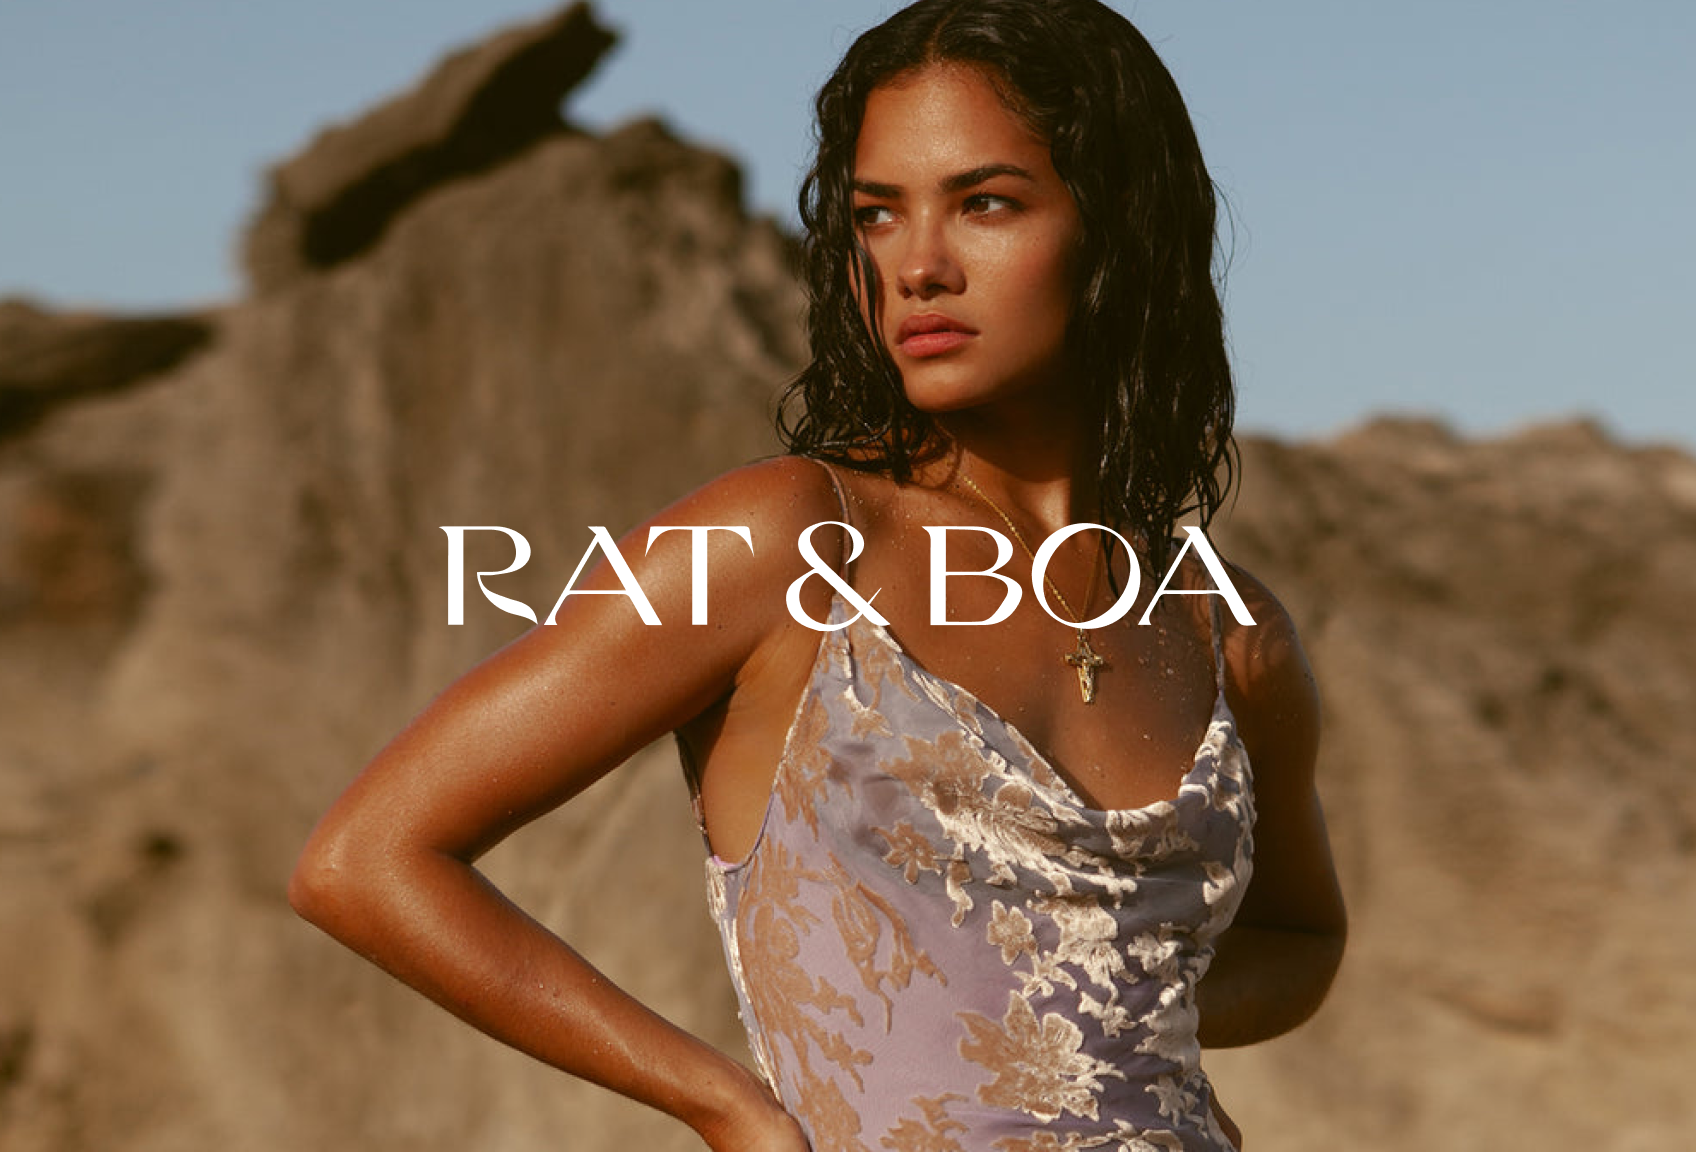 Marketing image from Rat&Boa with their logo for over the top.